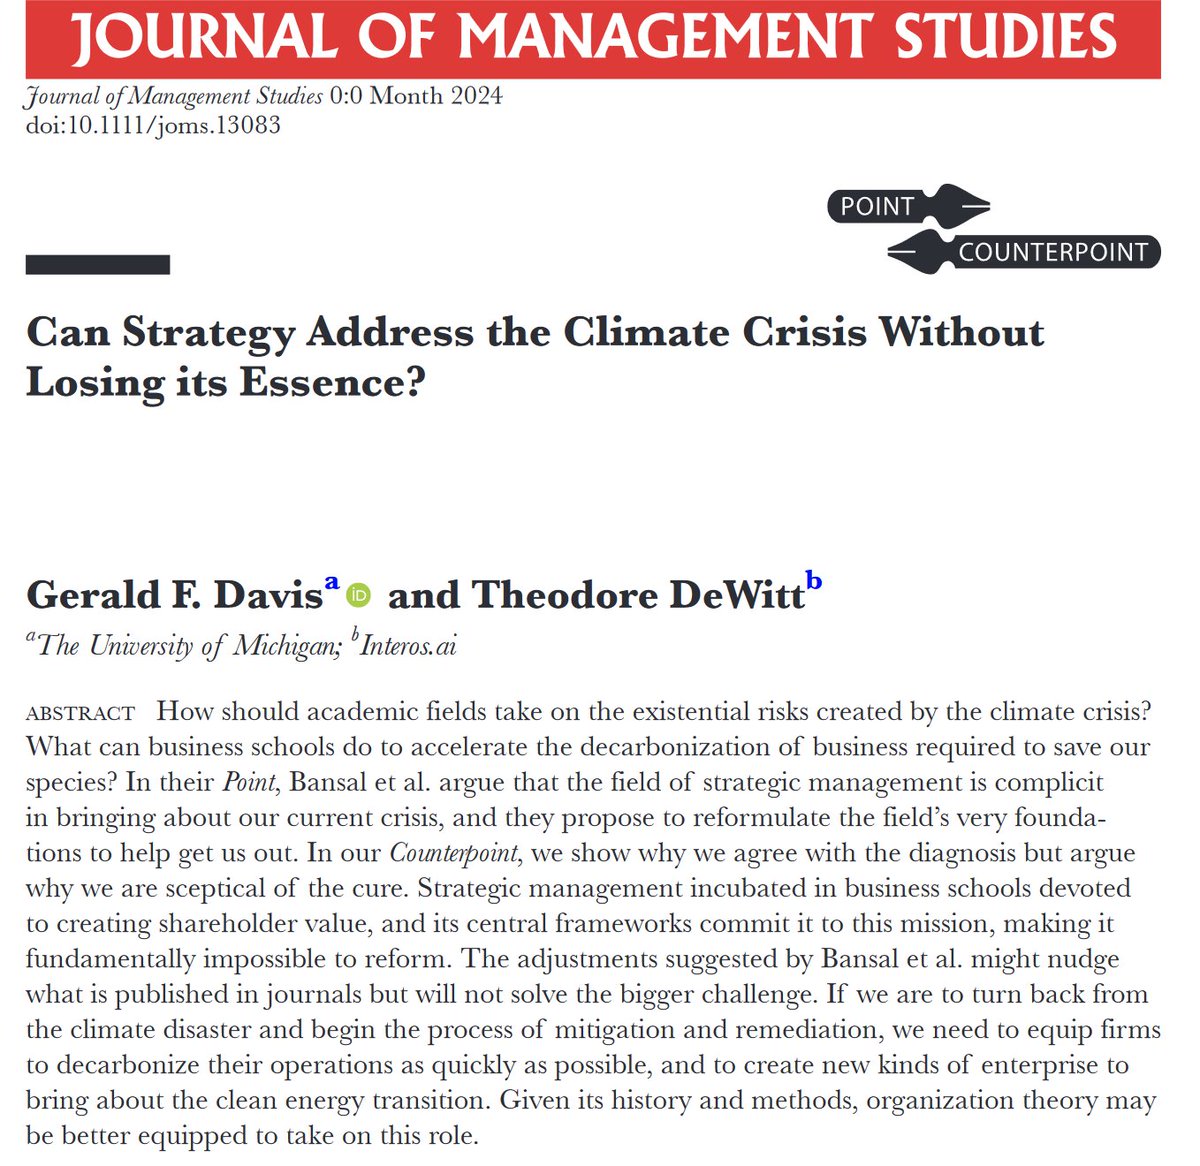 Can the academic field of strategy face the climate crisis and abandon its love of shareholder value? Another banger with Teddy DeWitt -- this one is sure to win us some friends. onlinelibrary.wiley.com/doi/epdf/10.11…